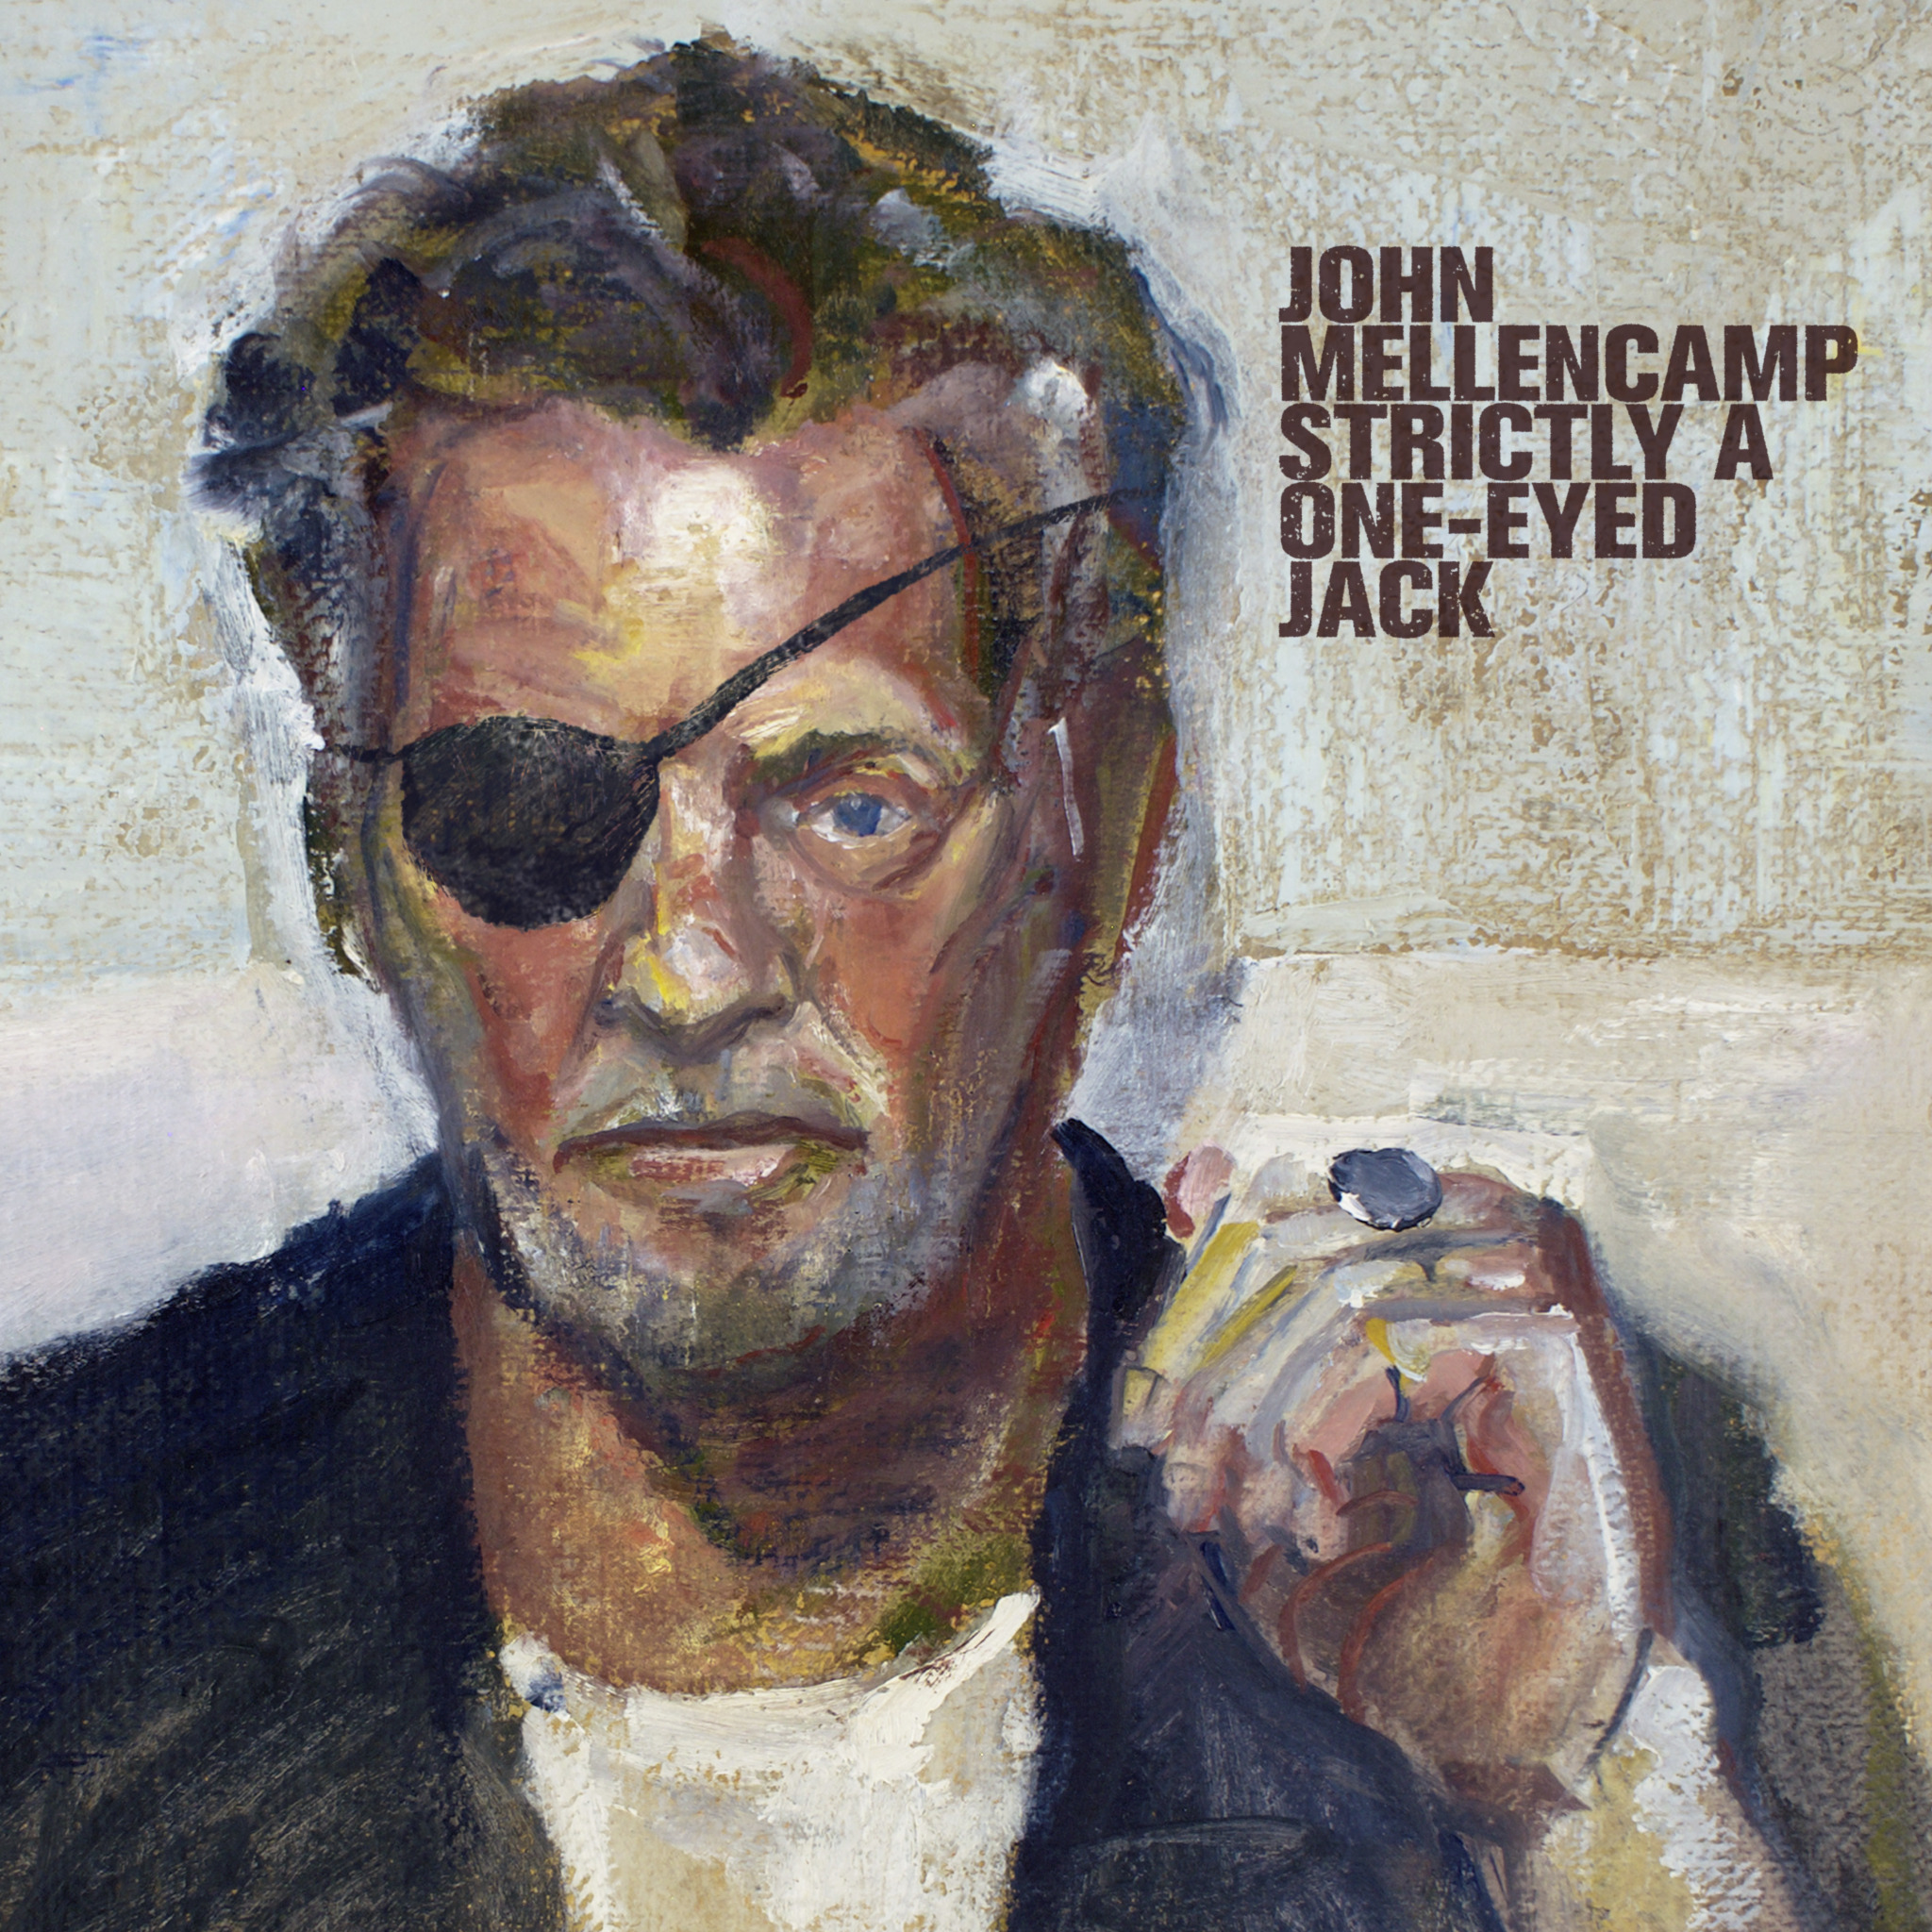 JOHN MELLENCAMP’S HIGHLY ANTICIPATED NEW ALBUM STRICTLY A ONE-EYED JACK OUT NOW